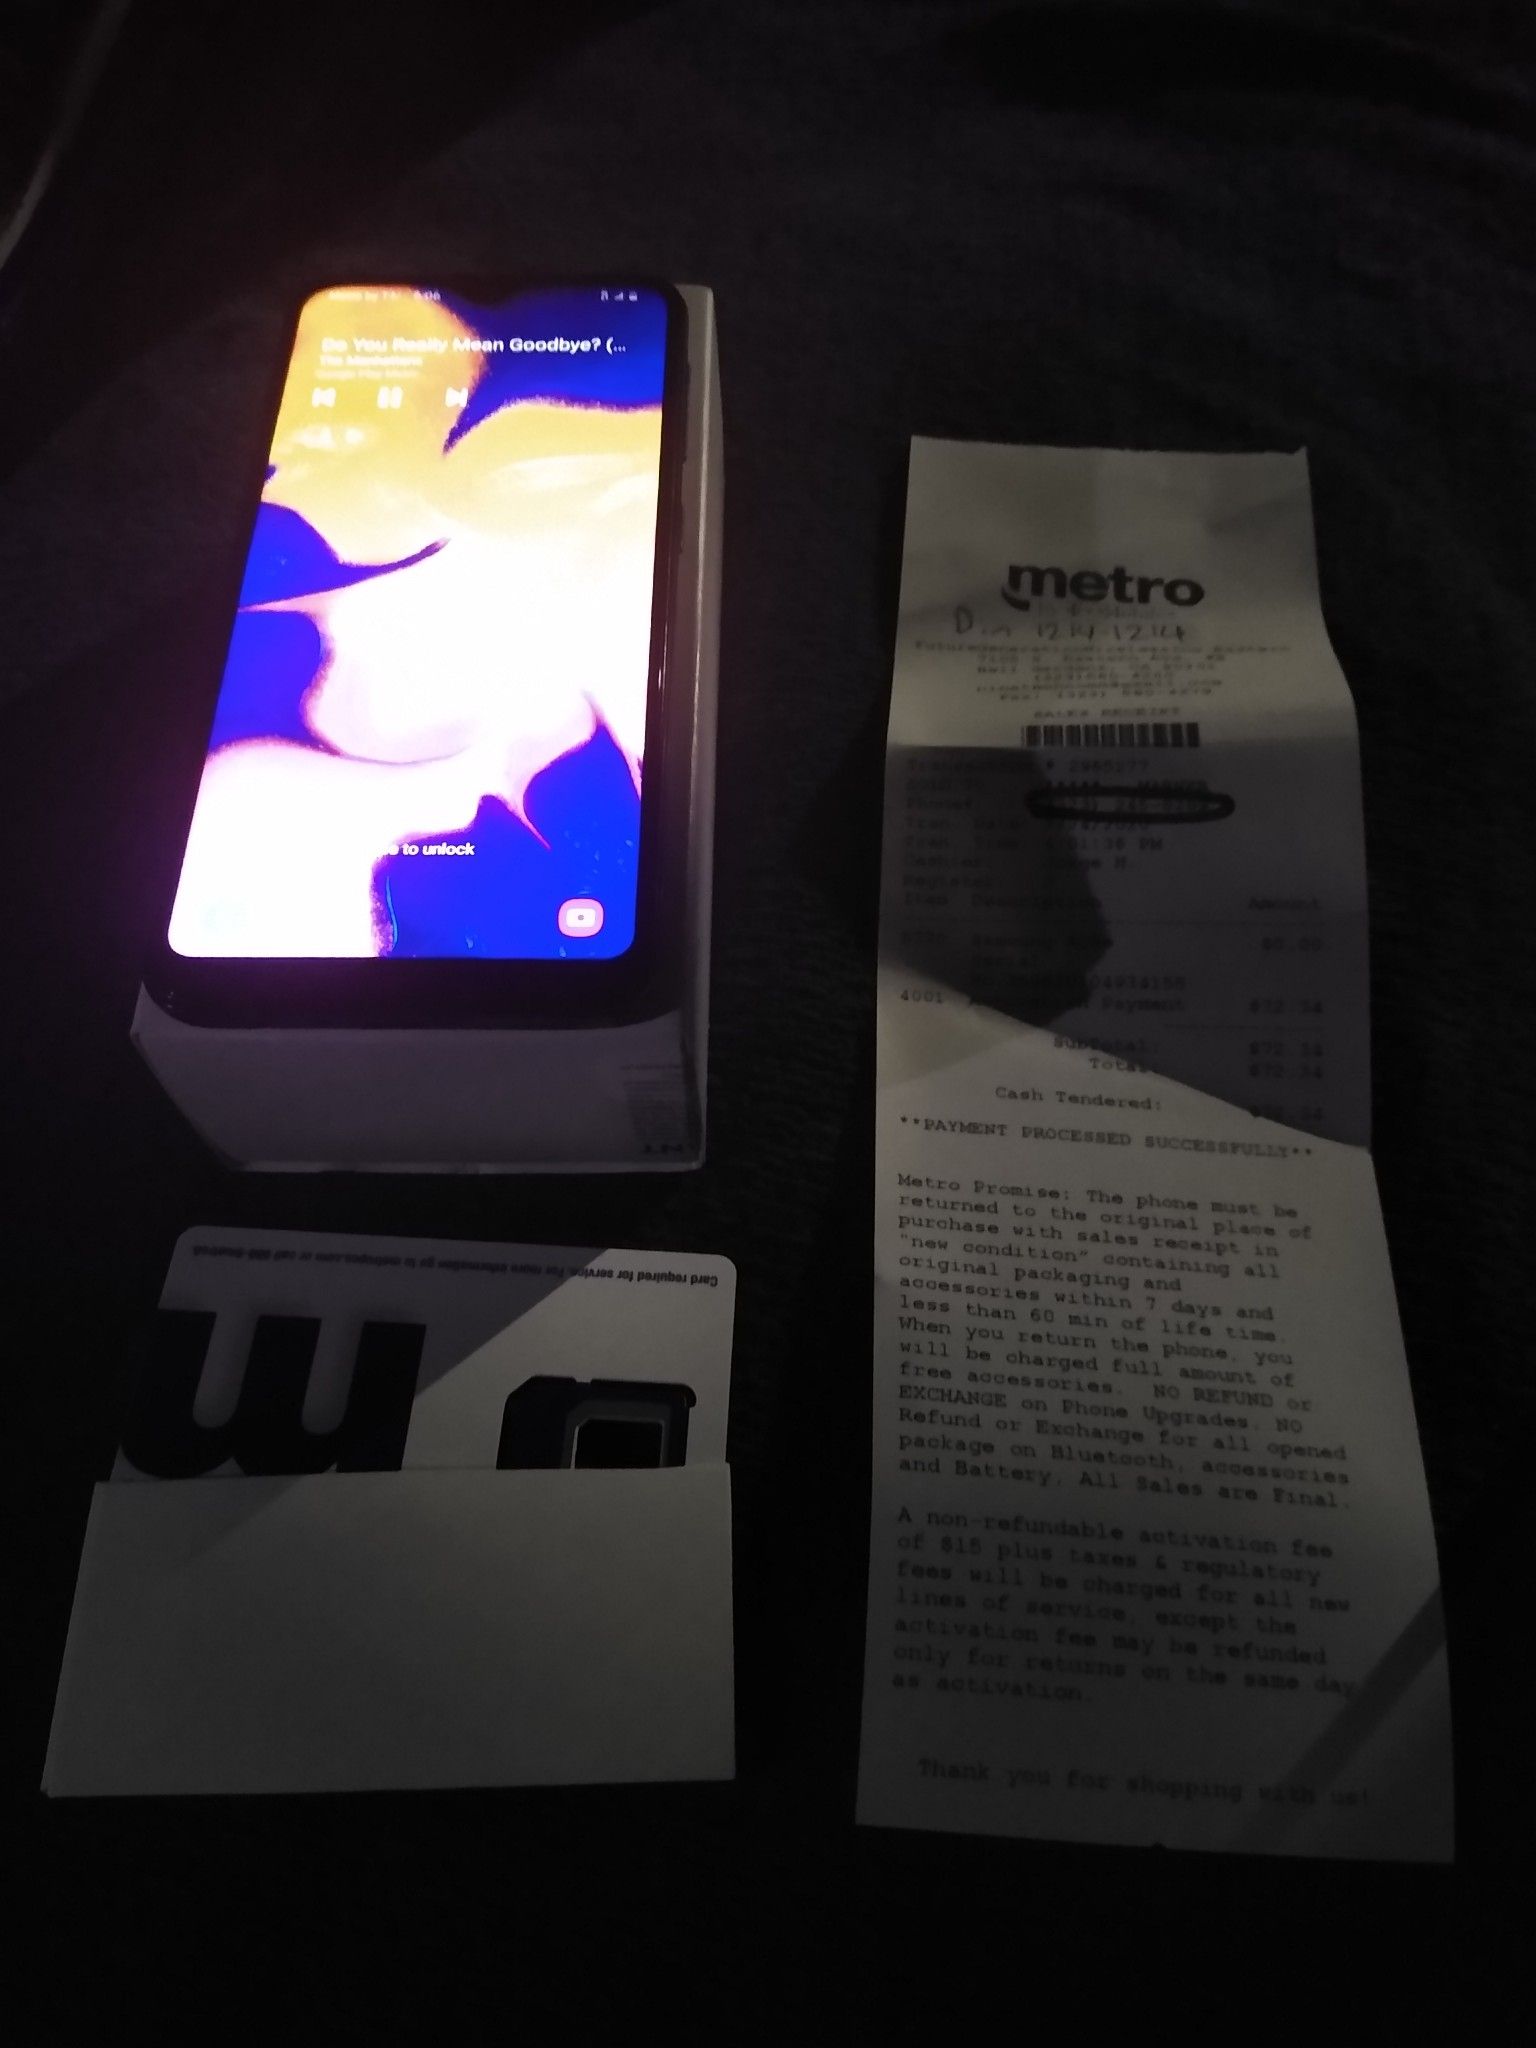 Samsung A10 w one month service activated 02/24/20